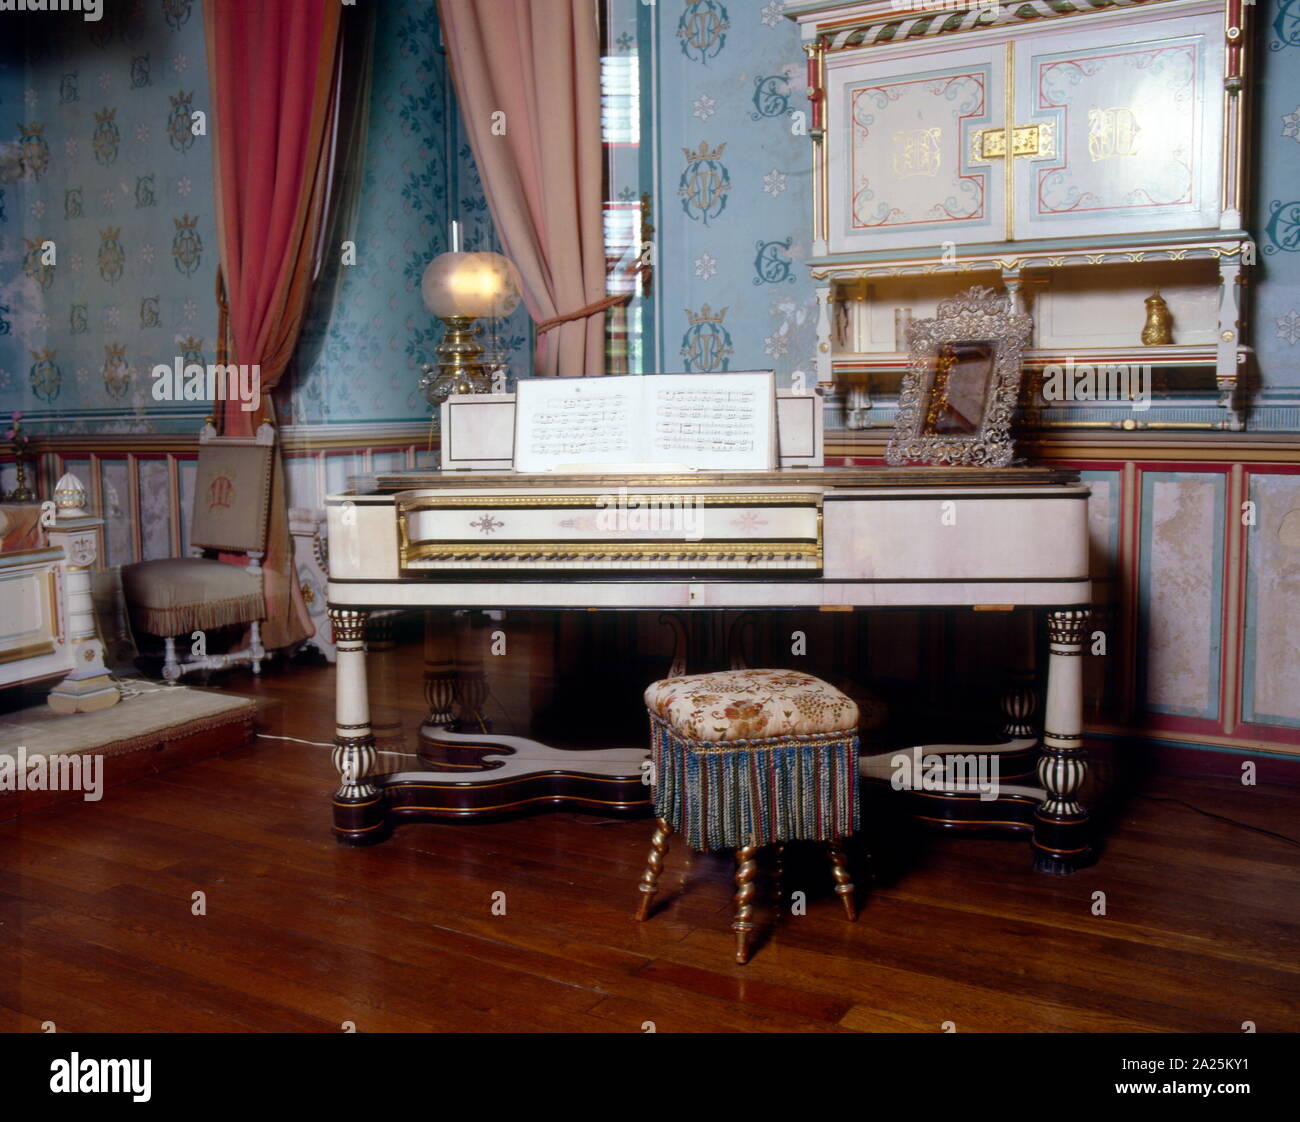 19th century Ivory covered piano in a salon of the Château de  Roquetaillade; a castle in Mazères (near Bordeaux), France. The  extraordinary interior decorations, with its furnishings and paintings,  were created by